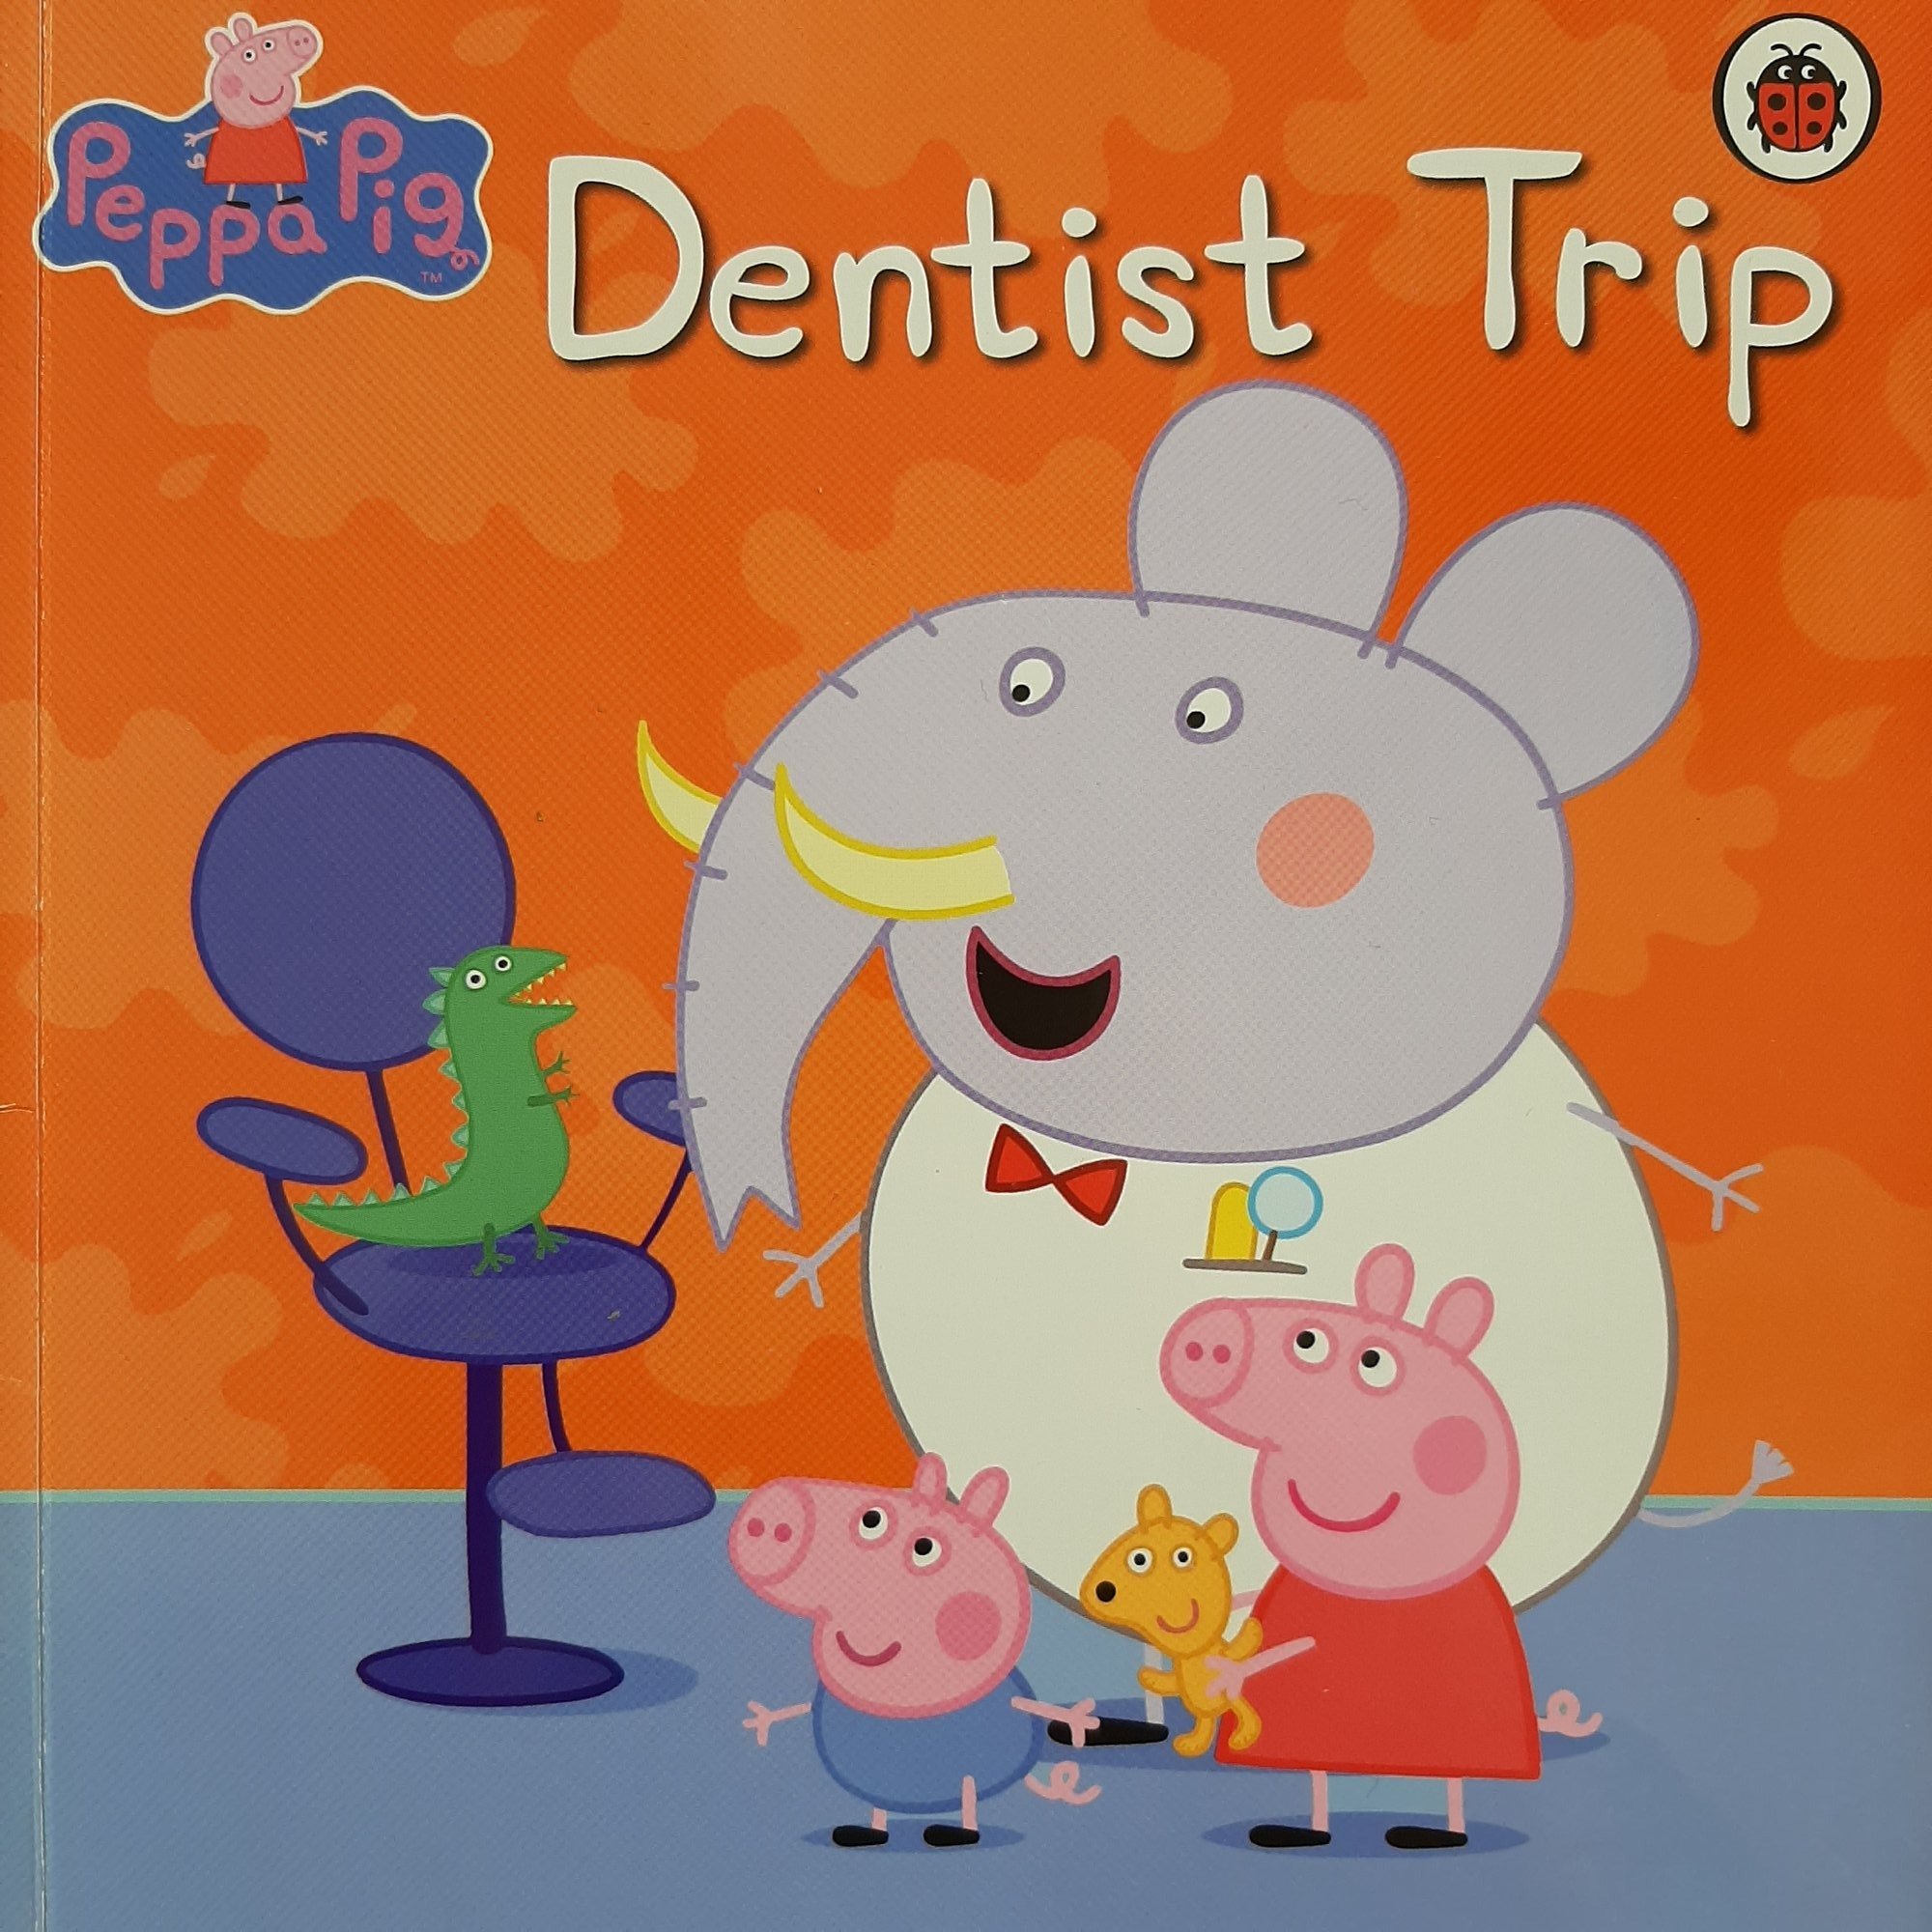 Peppa Pig - Dentist Trip - image of book cover